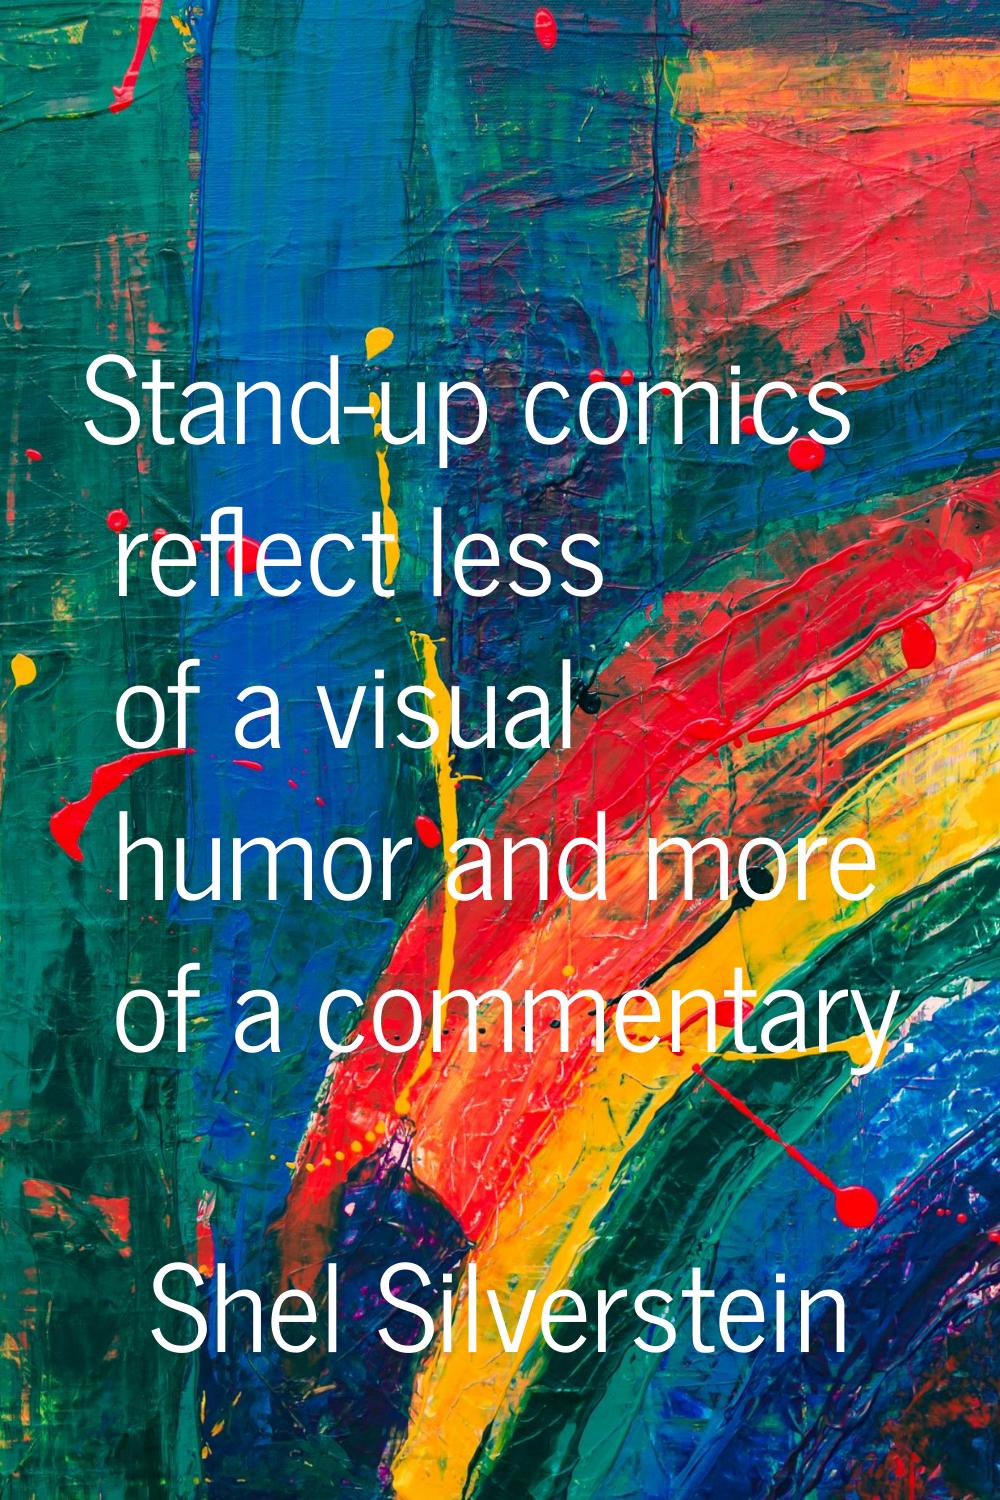 Stand-up comics reflect less of a visual humor and more of a commentary.